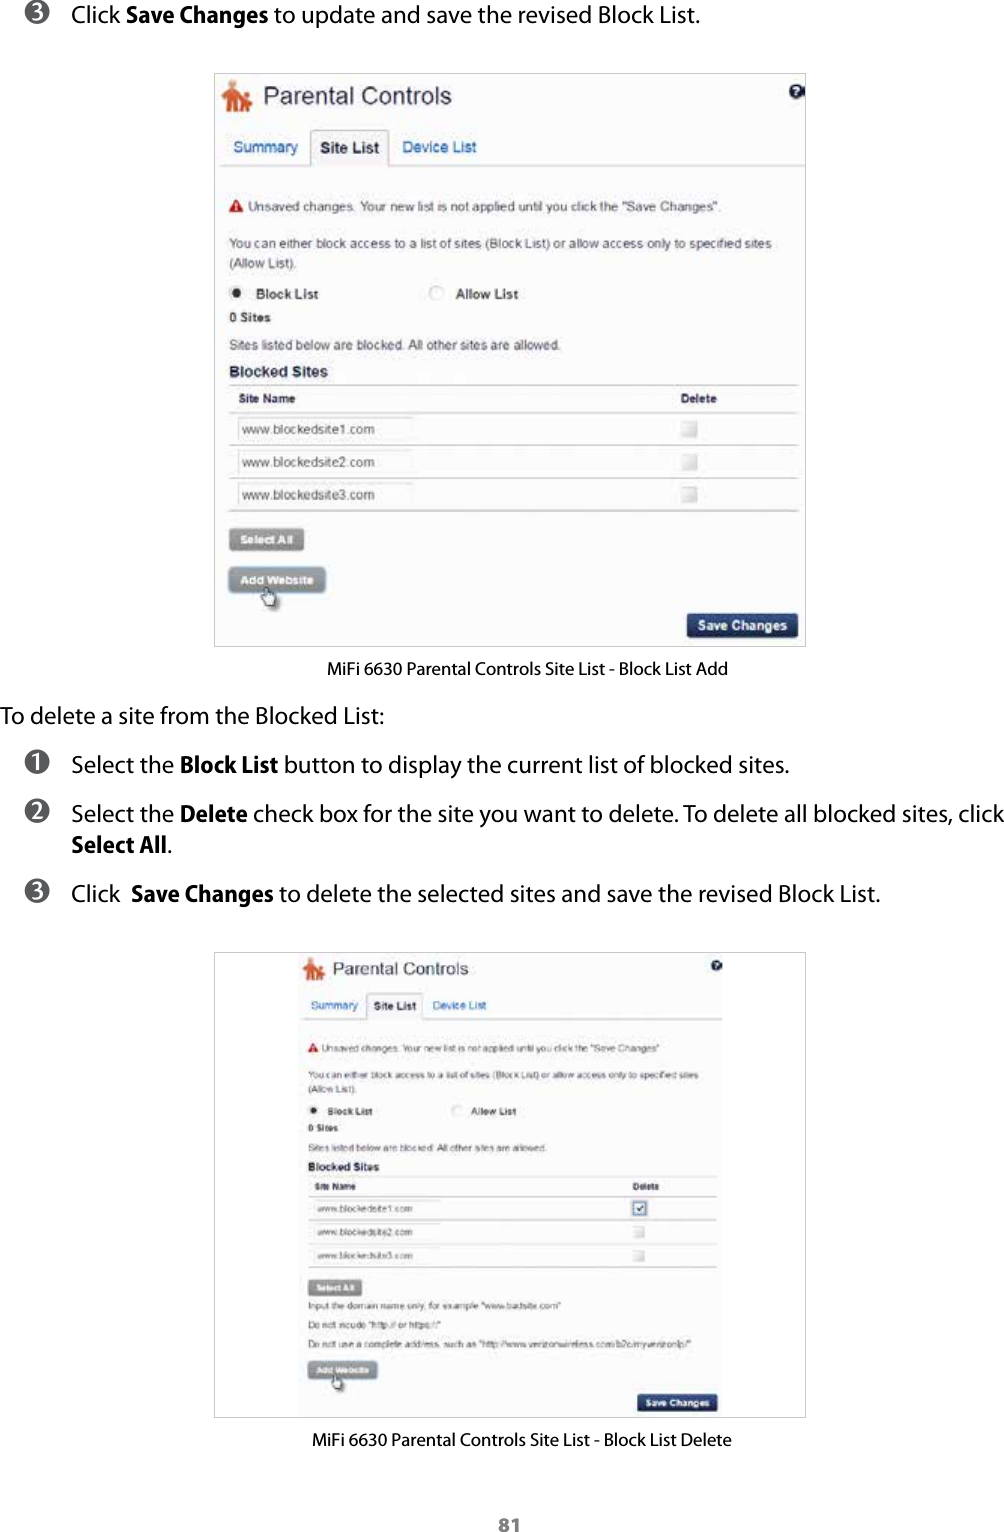 81 ➌ Click Save Changes to update and save the revised Block List.MiFi 6630 Parental Controls Site List - Block List AddTo delete a site from the Blocked List: ➊ Select the Block List button to display the current list of blocked sites. ➋ Select the Delete check box for the site you want to delete. To delete all blocked sites, click Select All. ➌ Click  Save Changes to delete the selected sites and save the revised Block List.MiFi 6630 Parental Controls Site List - Block List Delete